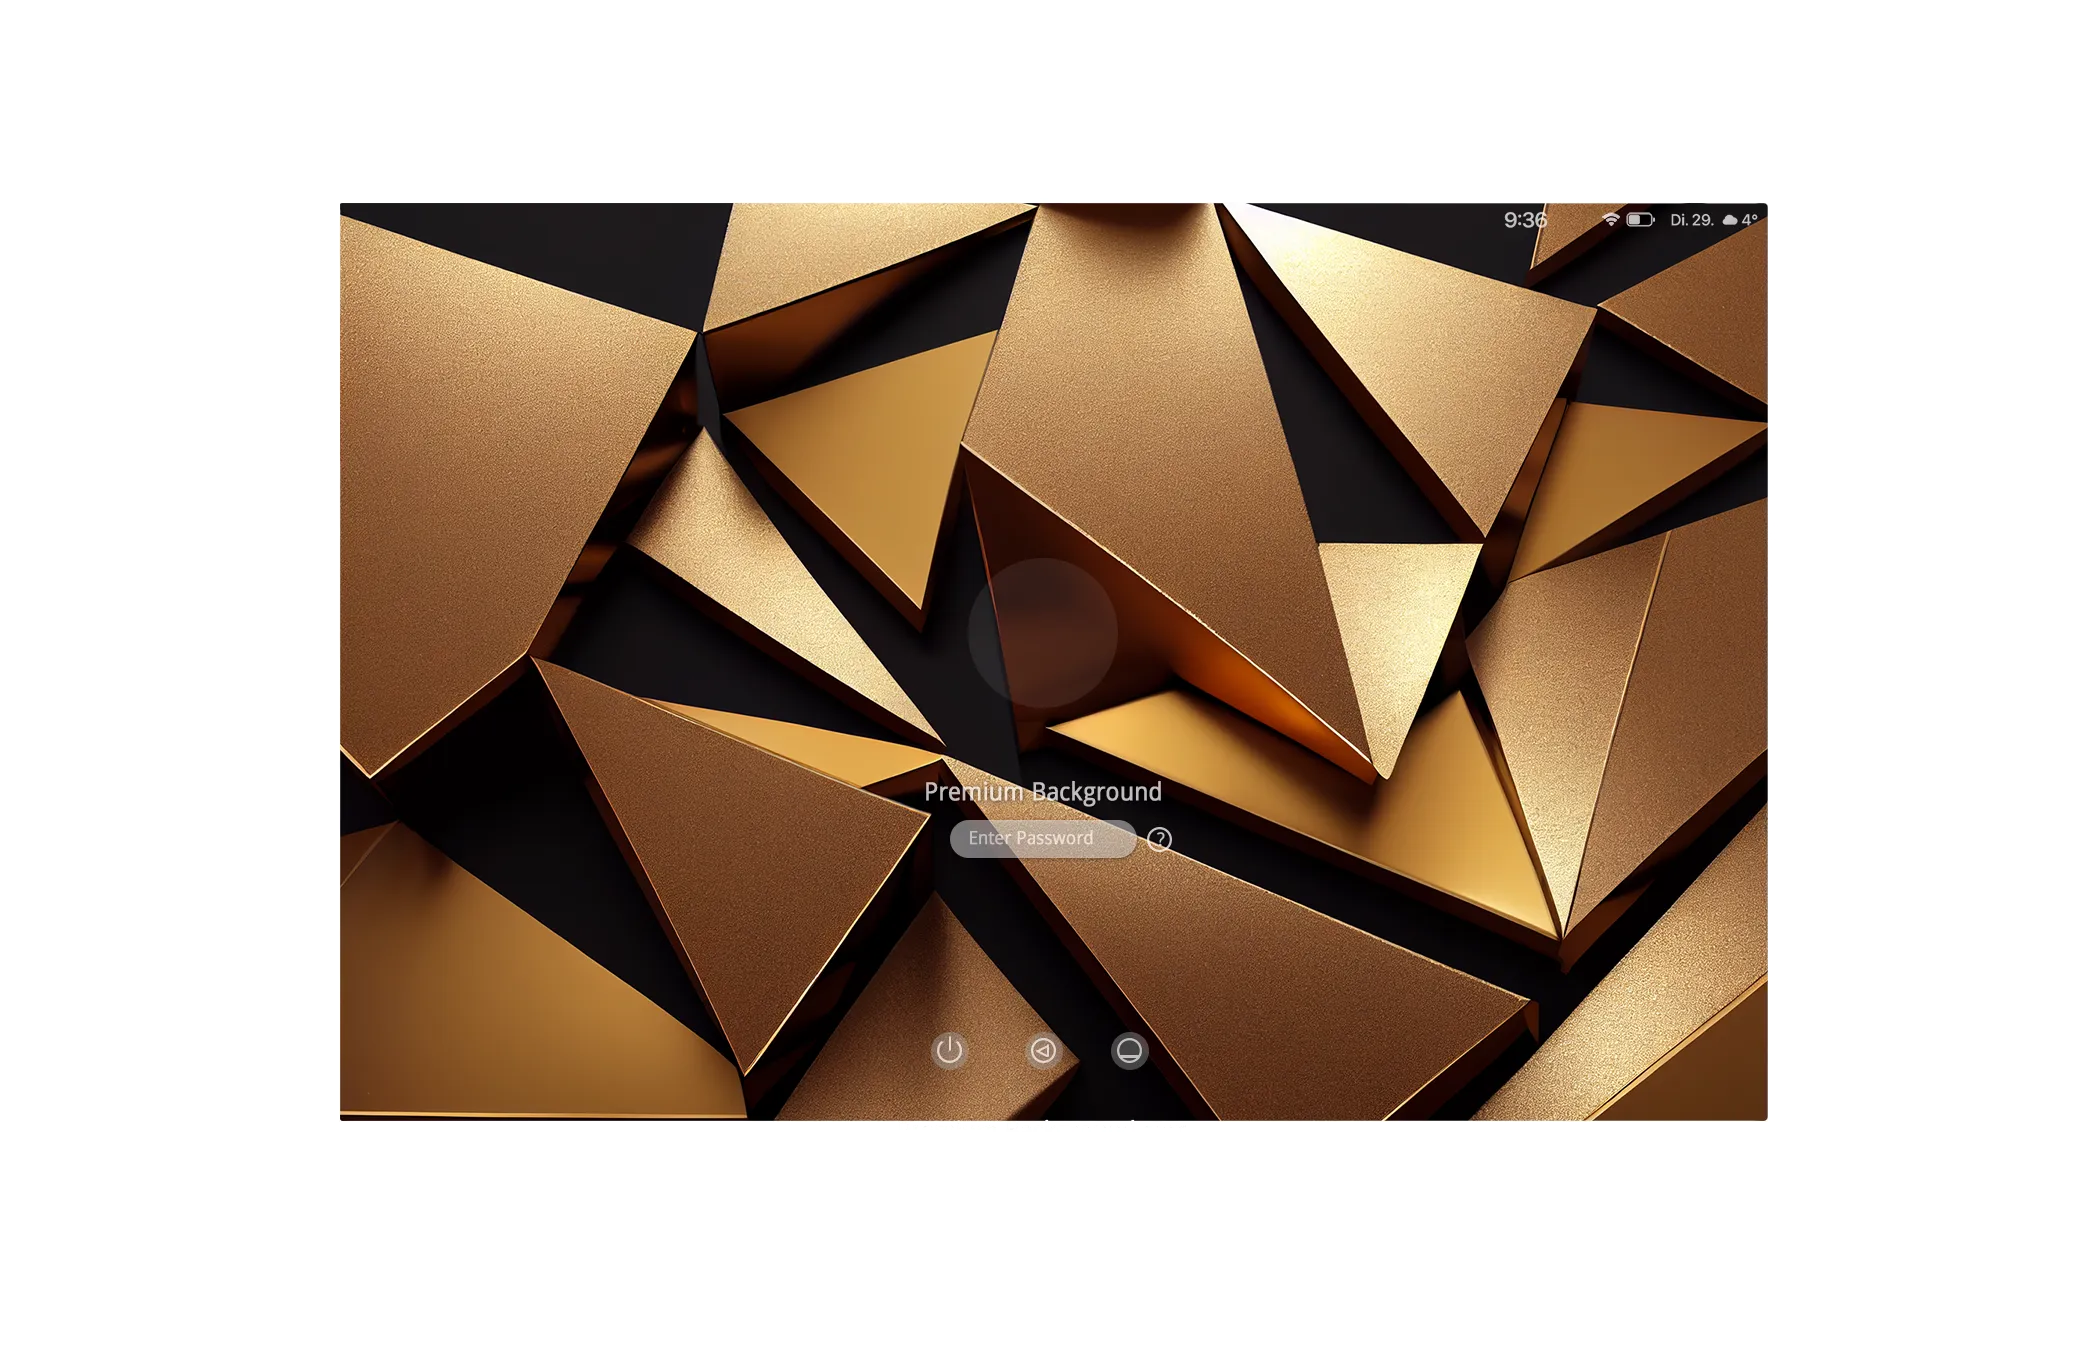 Free high resolution 4k luxury backgrounds for MacBook, MacBook Pro, MacBook Air and Ipad, Ipad Pro, Ipad Air, Ipad mini backgrounds. 3d illustration, abstract, architecture, art, backdrop, background, black, brush, business, card, creative, design, elegant, flow, fluid art, glitter, glow, gold, golden, gradient, graphic, gray, ink, invitation, light, liquid, luxury, marble, marbling, metallic, modern, natural, nature, paint, pattern, shiny, simple, splash, stone, surface, swirl, texture, textured, vintage, wall, wallpaper, water, watercolor, wedding, white